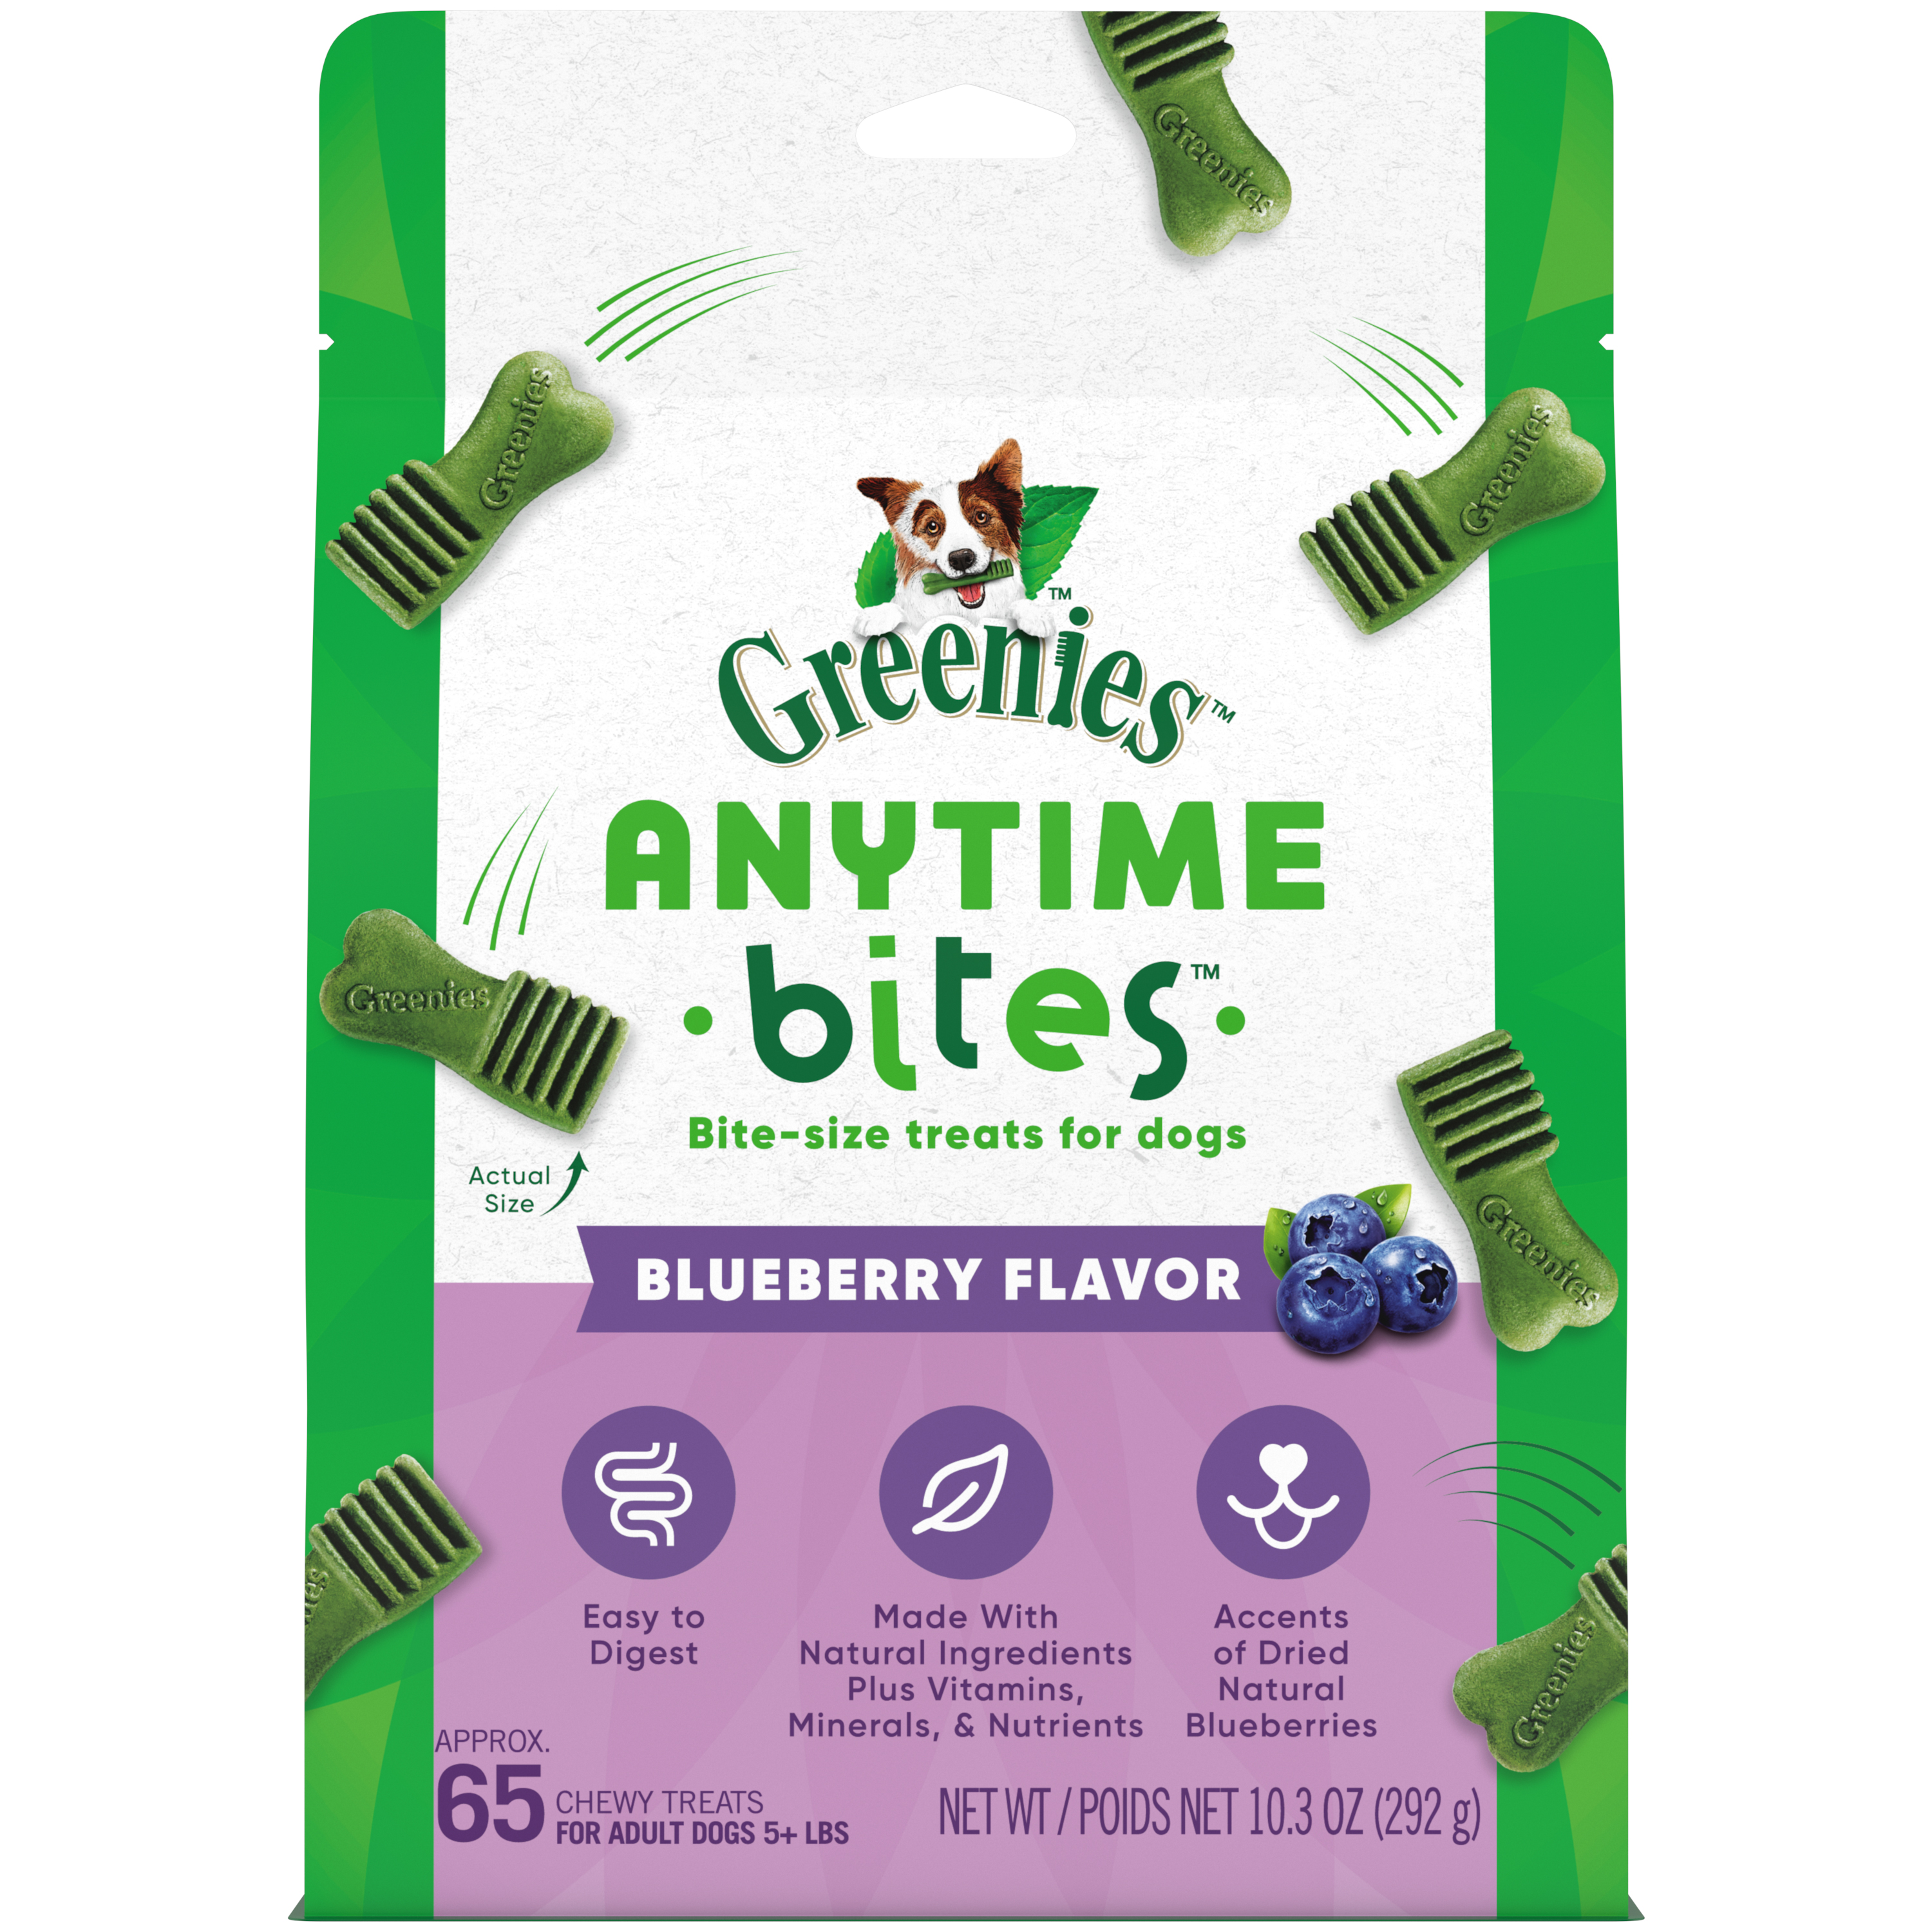 10.34 oz. Greenies Anytime Bites Blueberry - Health/First Aid